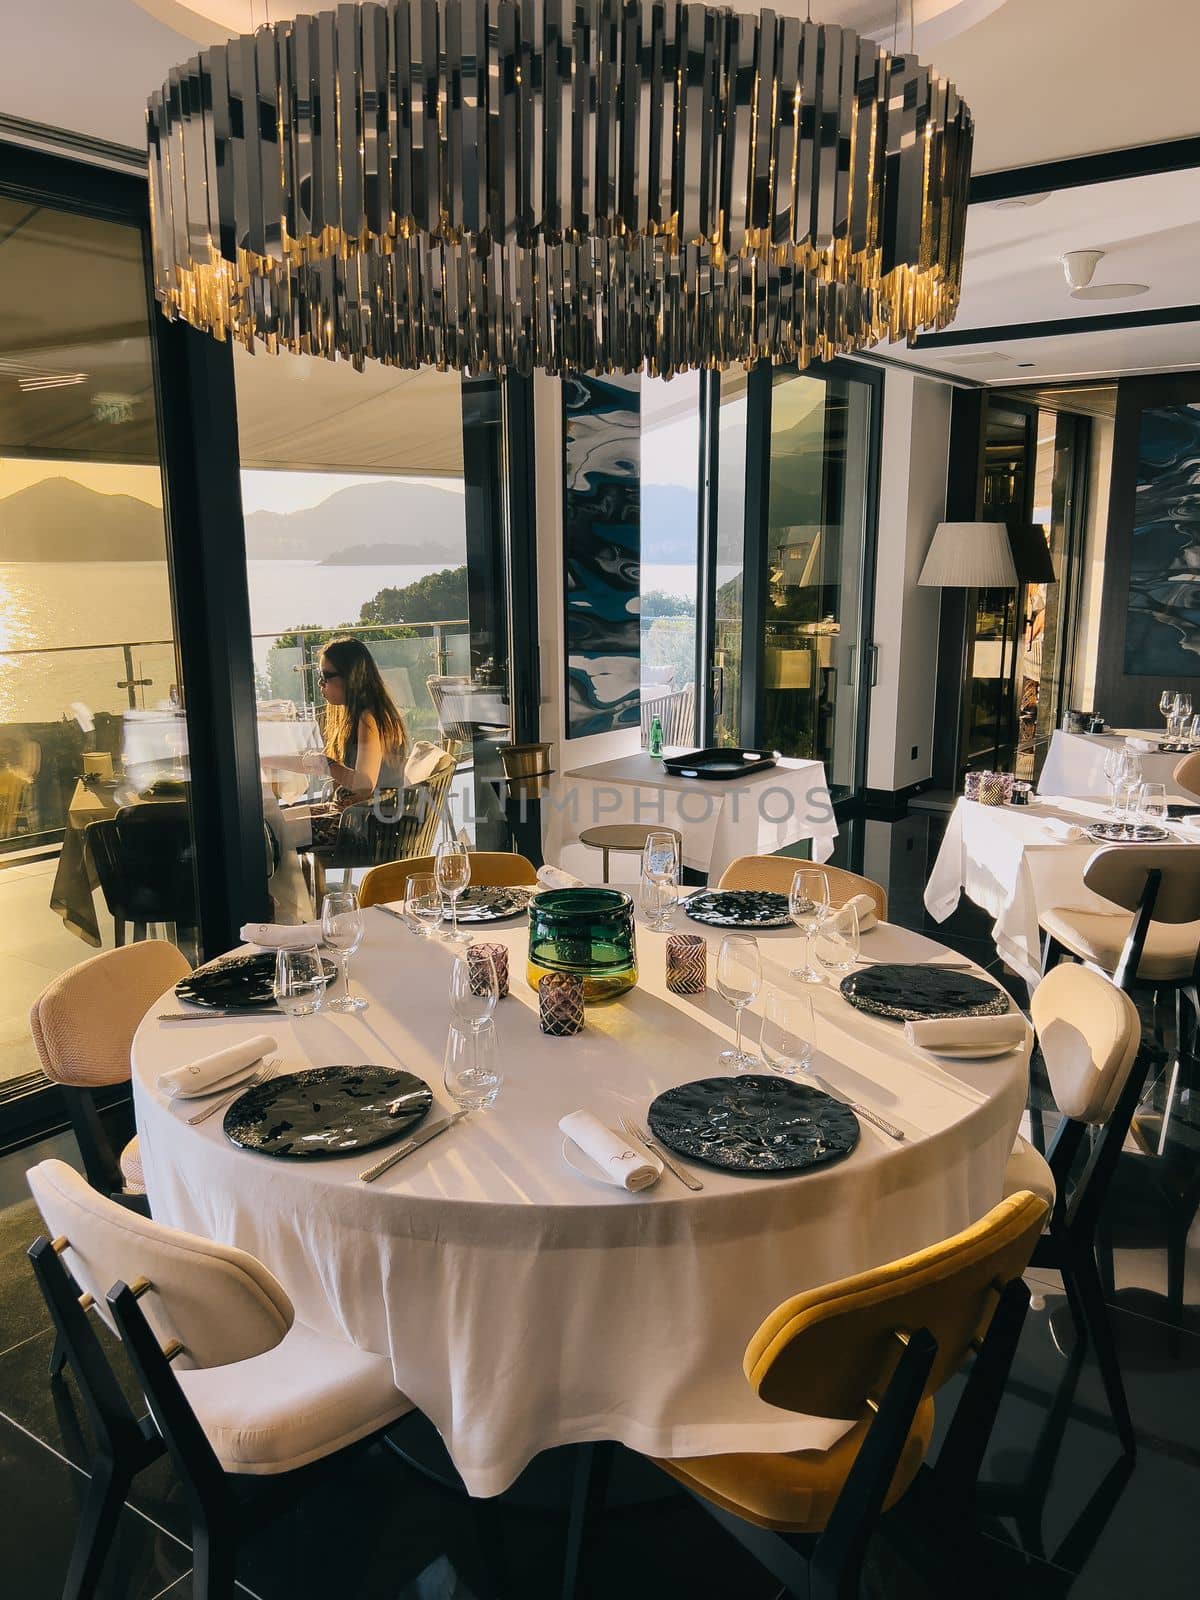 Large chandelier hangs over a set round table in a restaurant. High quality photo